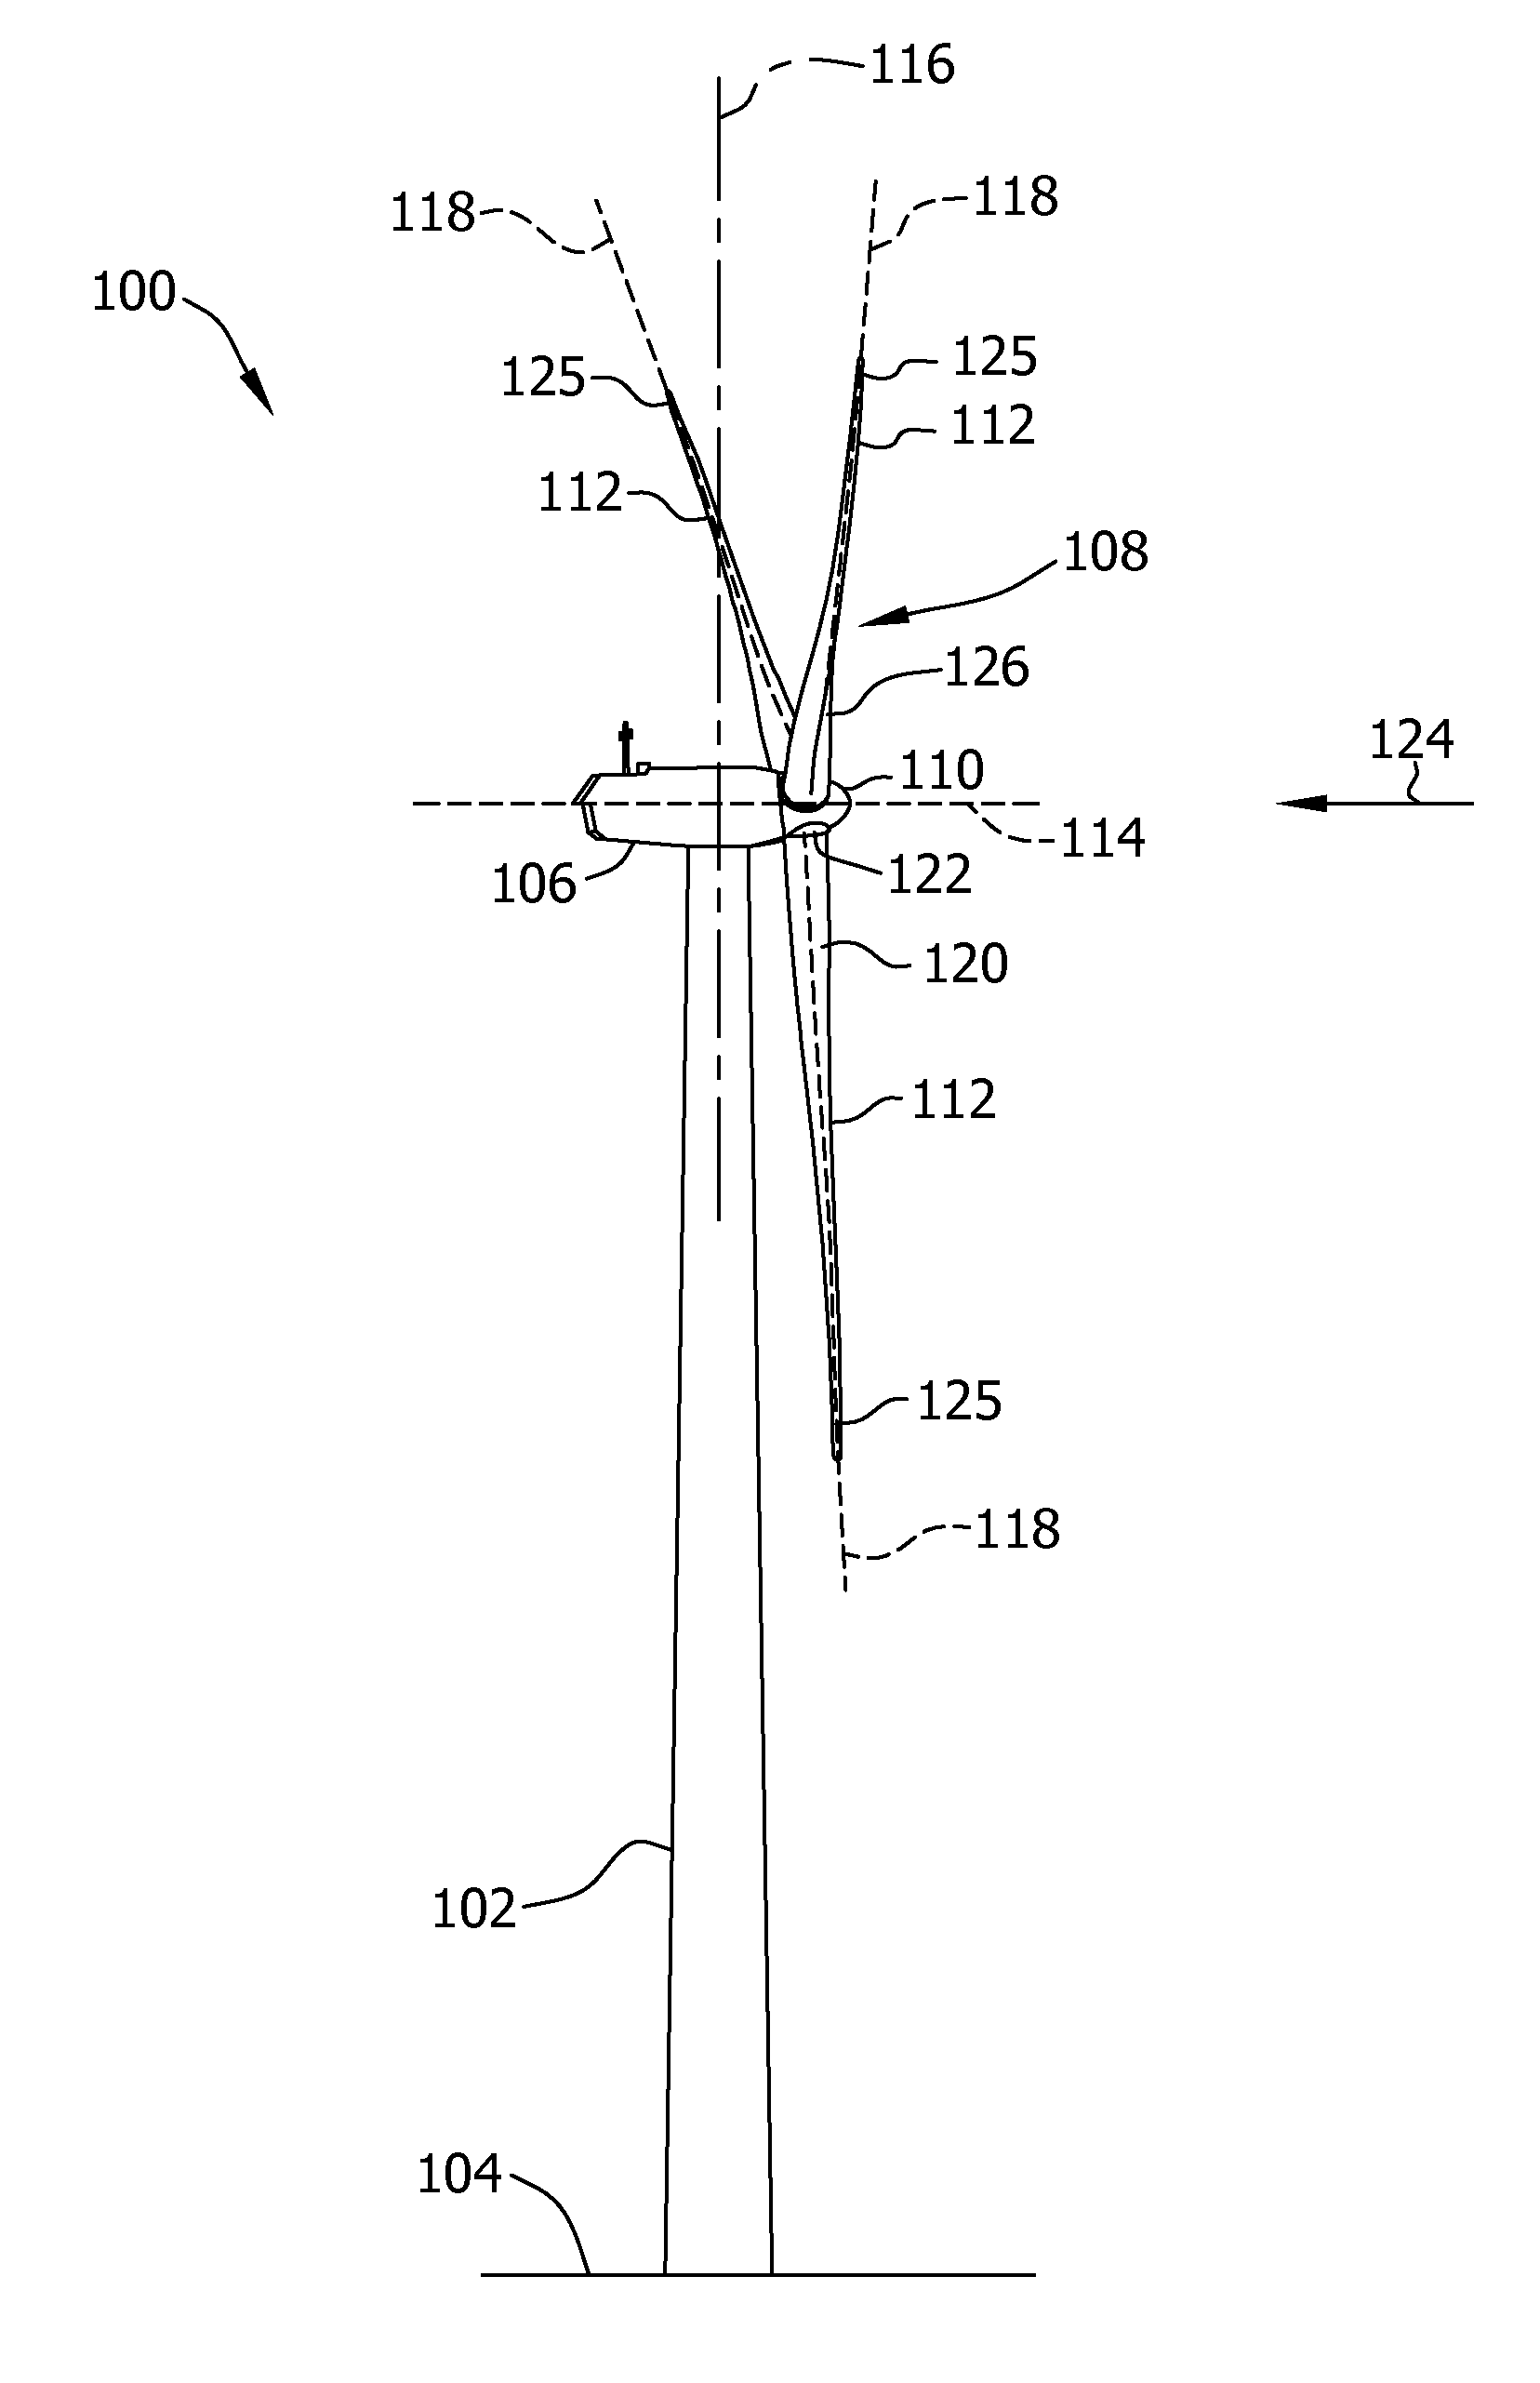 Condition monitoring system for wind turbine generator and method for operating wind turbine generator